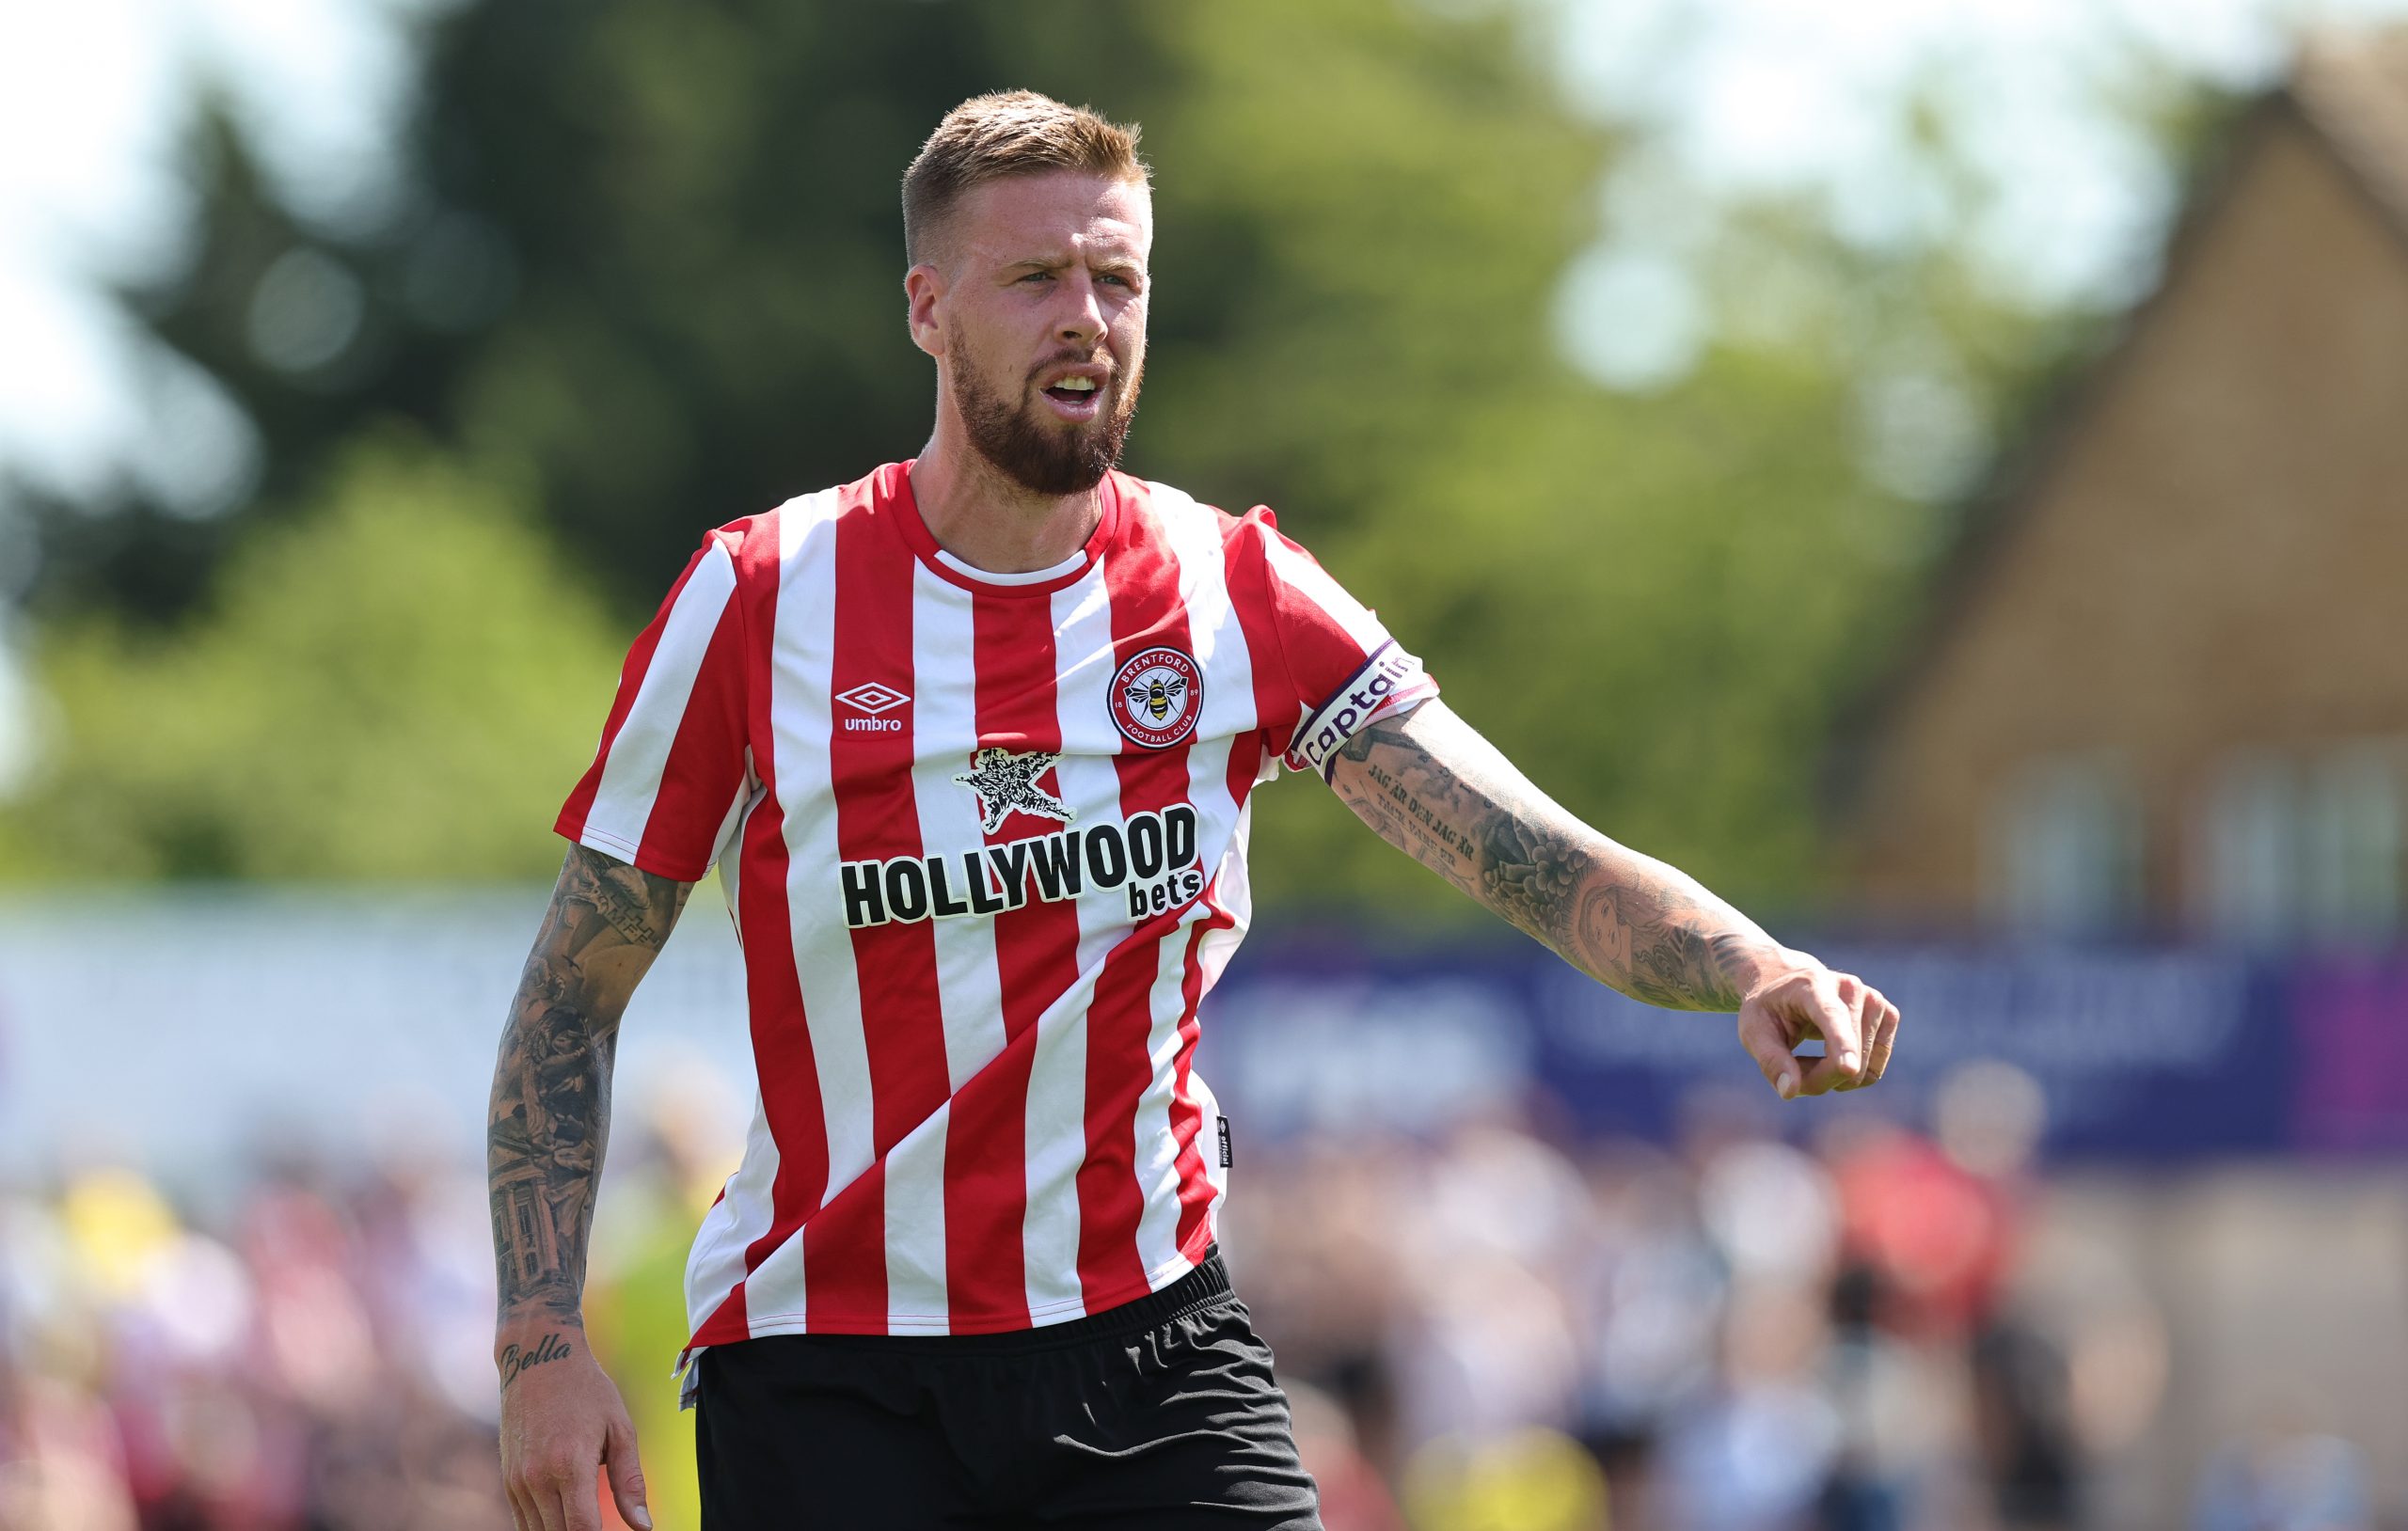 Pontus Jansson of Brentford looks on during the pre season friendly match between Boreham Wood and Brentford at Meadow Park on July 09, 2022 in Borehamwood, England. (Photo by David Rogers/Getty Images)